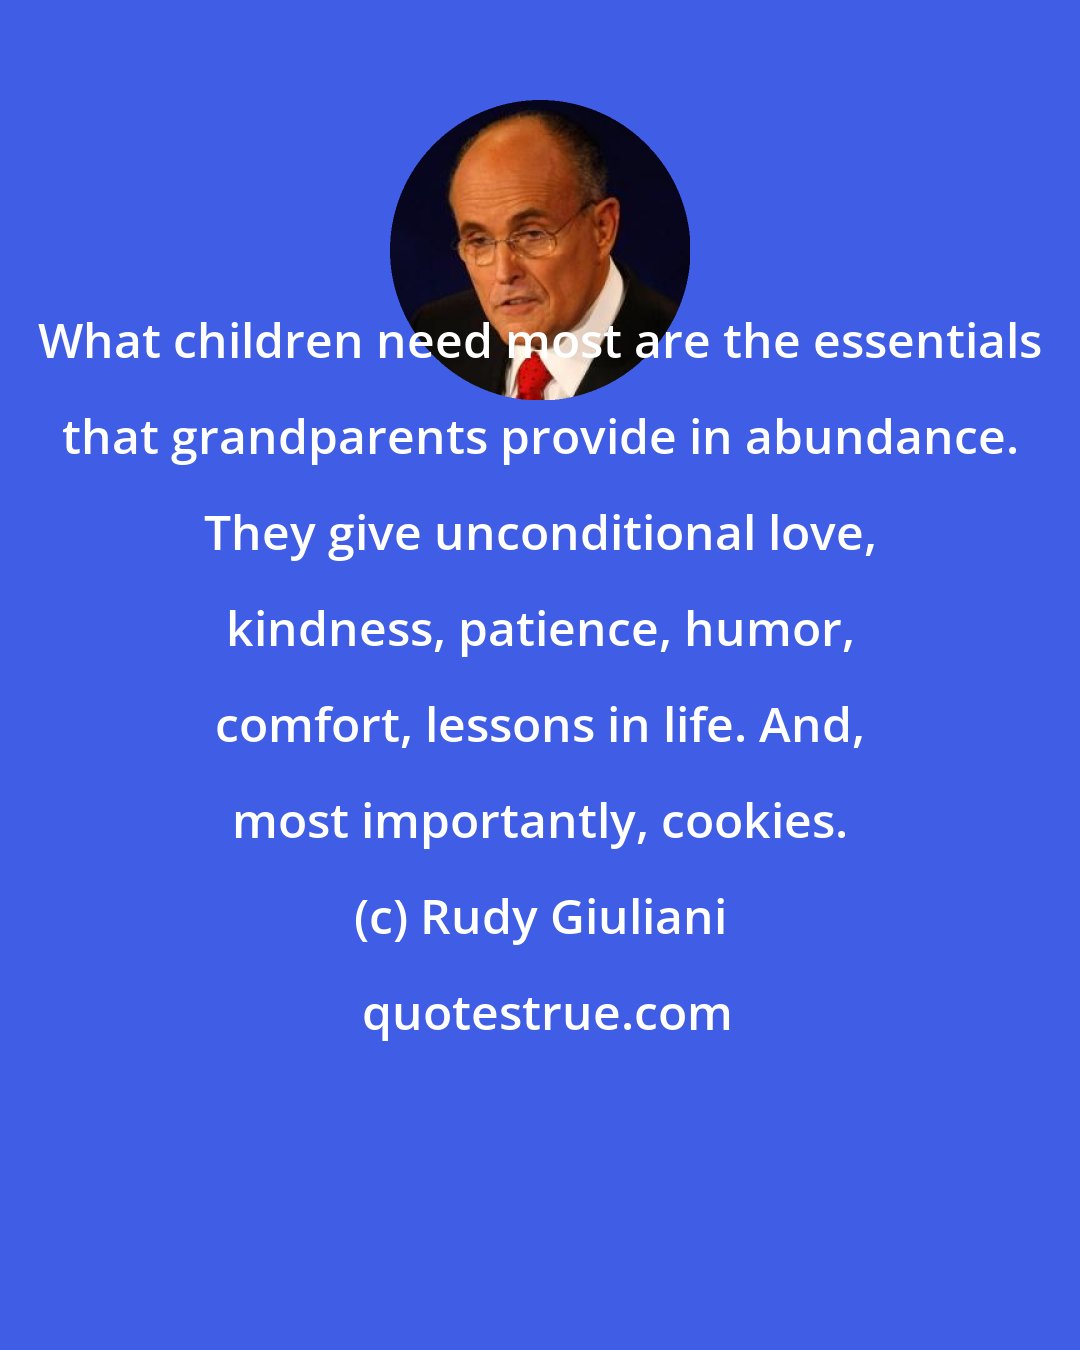 Rudy Giuliani: What children need most are the essentials that grandparents provide in abundance. They give unconditional love, kindness, patience, humor, comfort, lessons in life. And, most importantly, cookies.